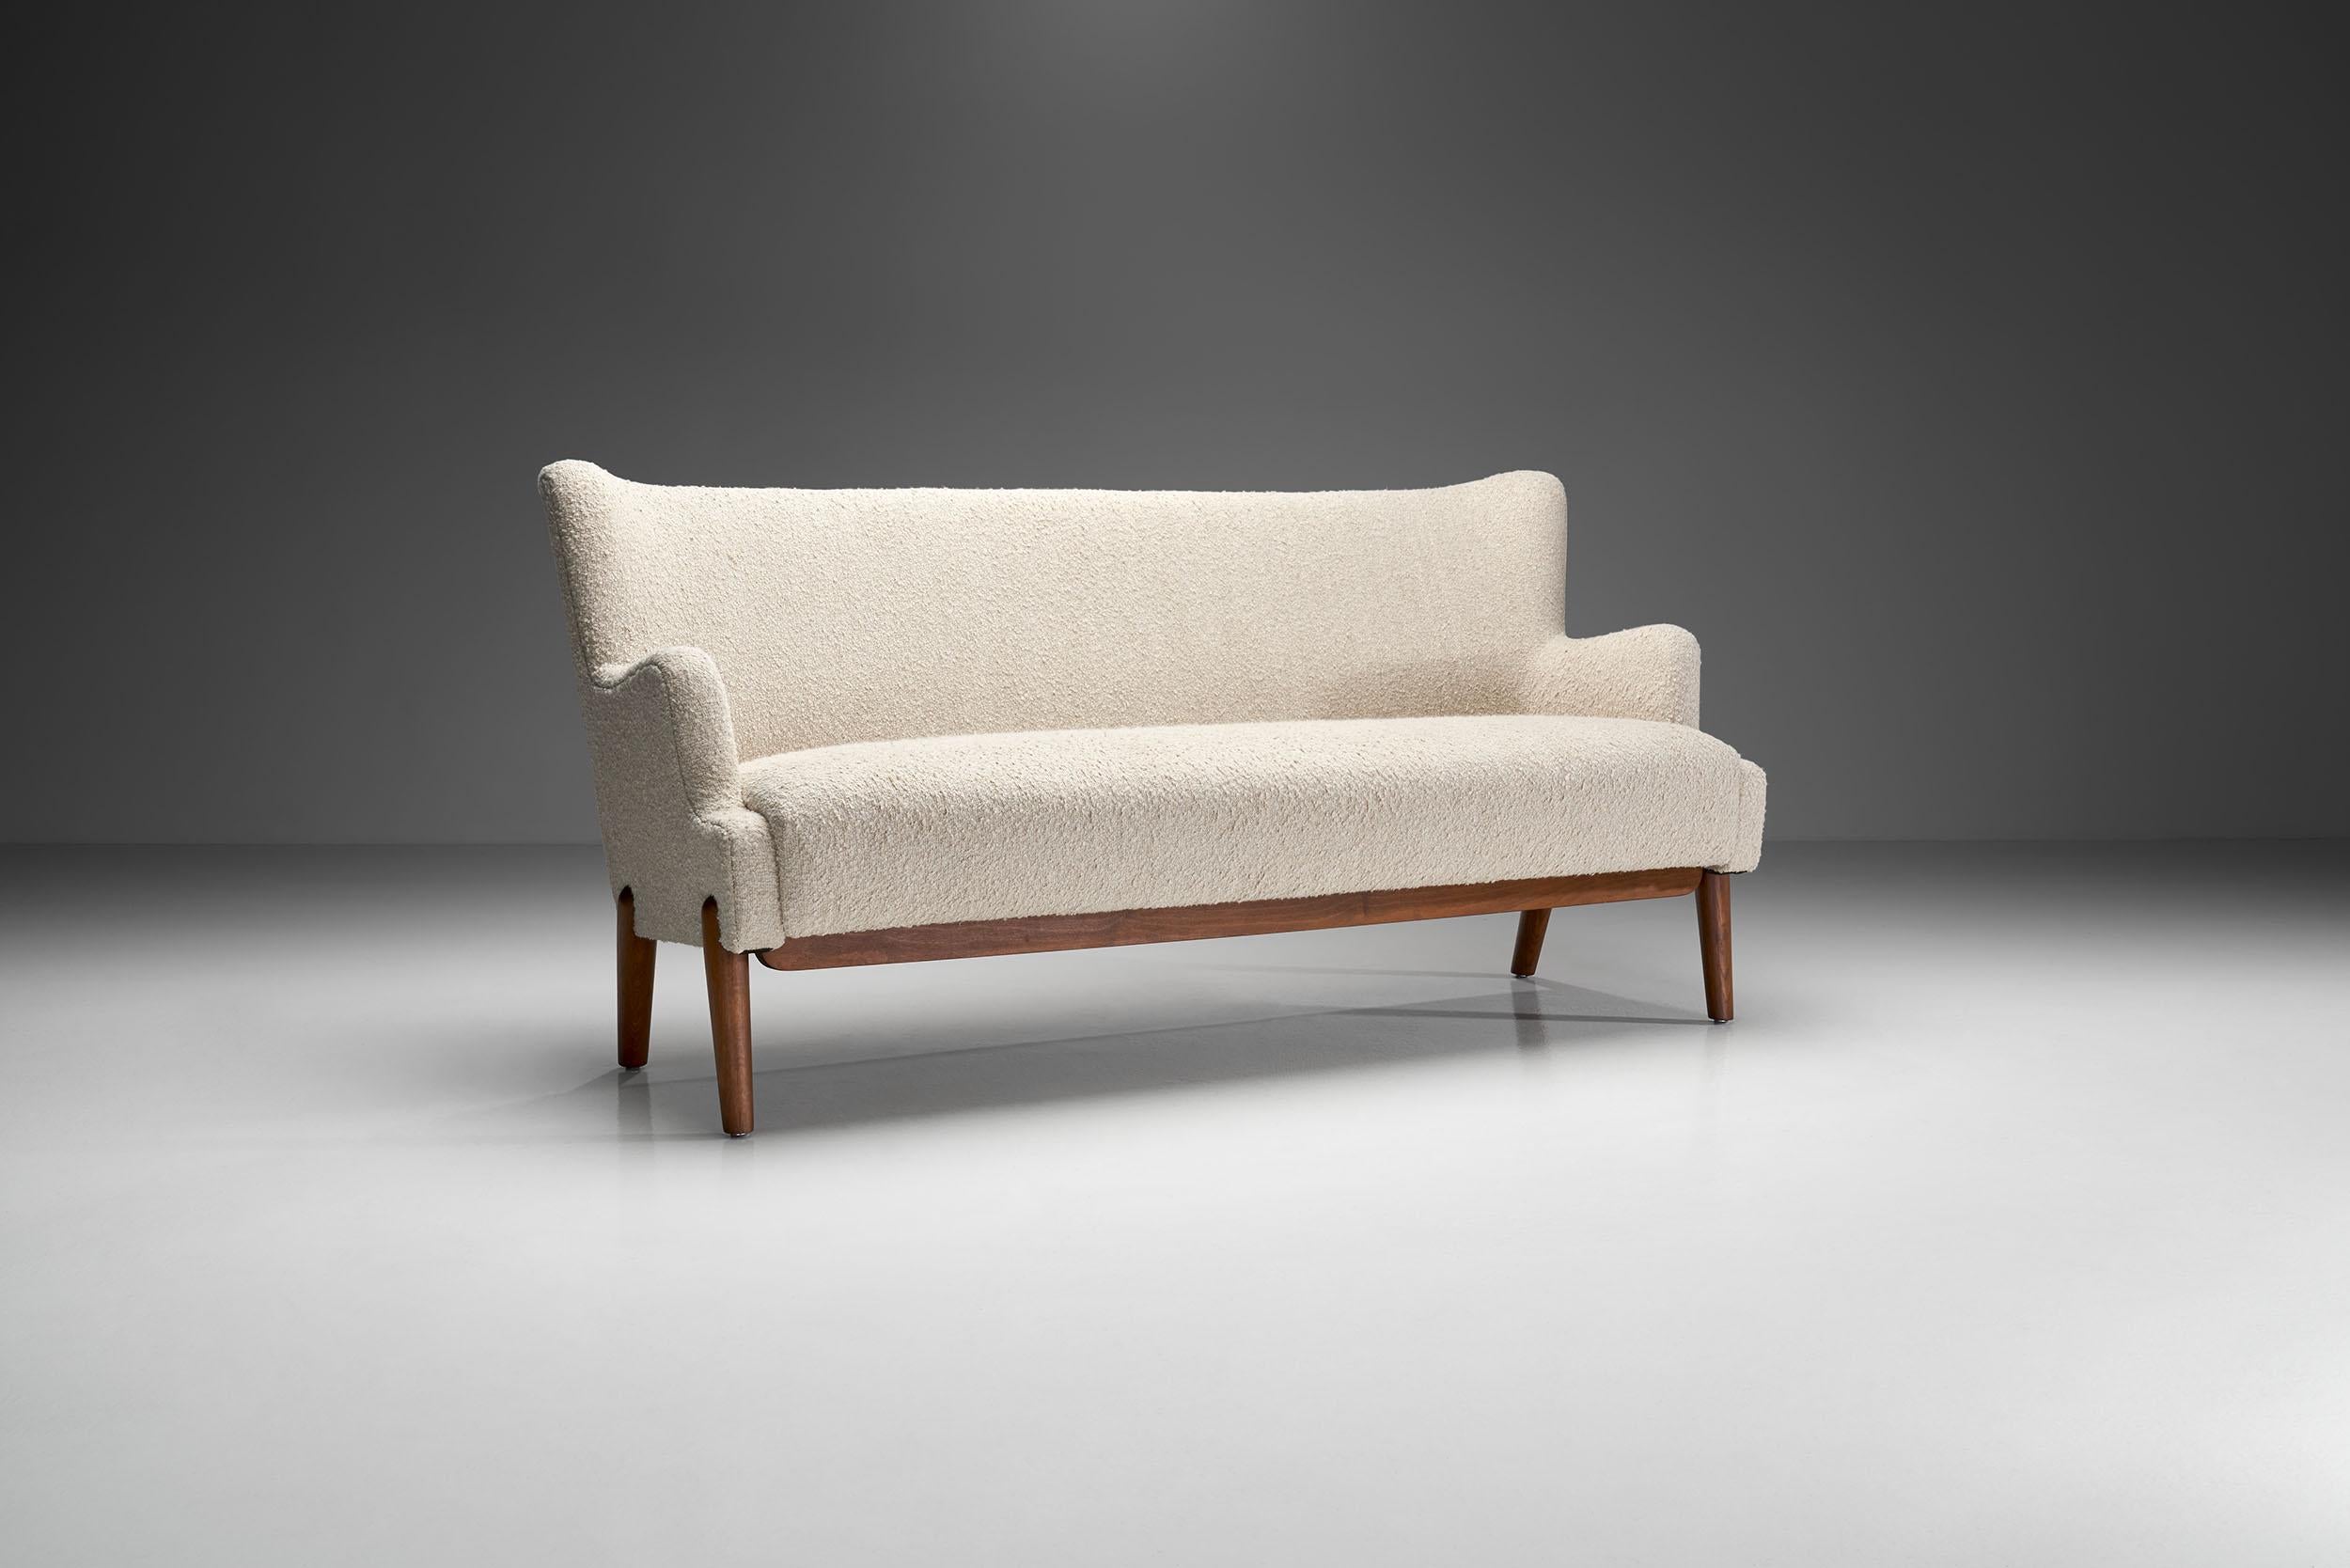 This three-seater sofa has the best characteristics of Danish mid-century modern design. Its comfort and delicate design elements make this three-seater the most coveted work of Eva and Nils Koppel.

The stair-like gradation of the armrests starts